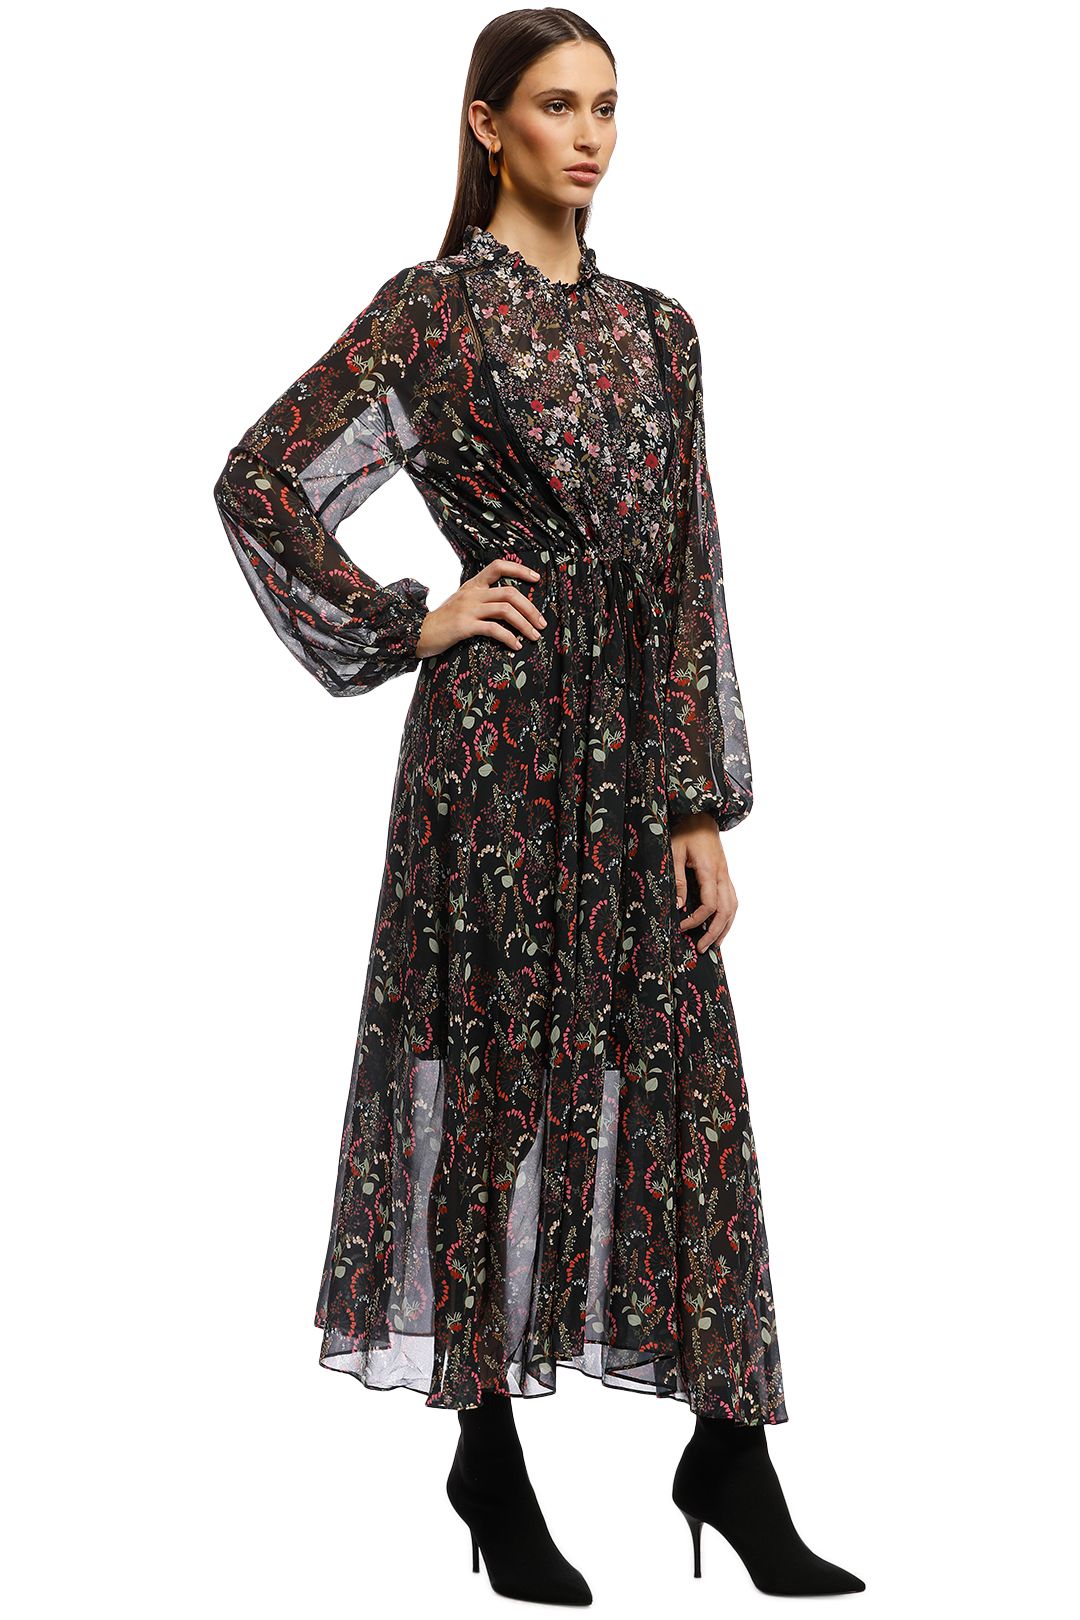 Cooper St - With A Kiss Long Sleeve Midi Dress - Black Floral - Side